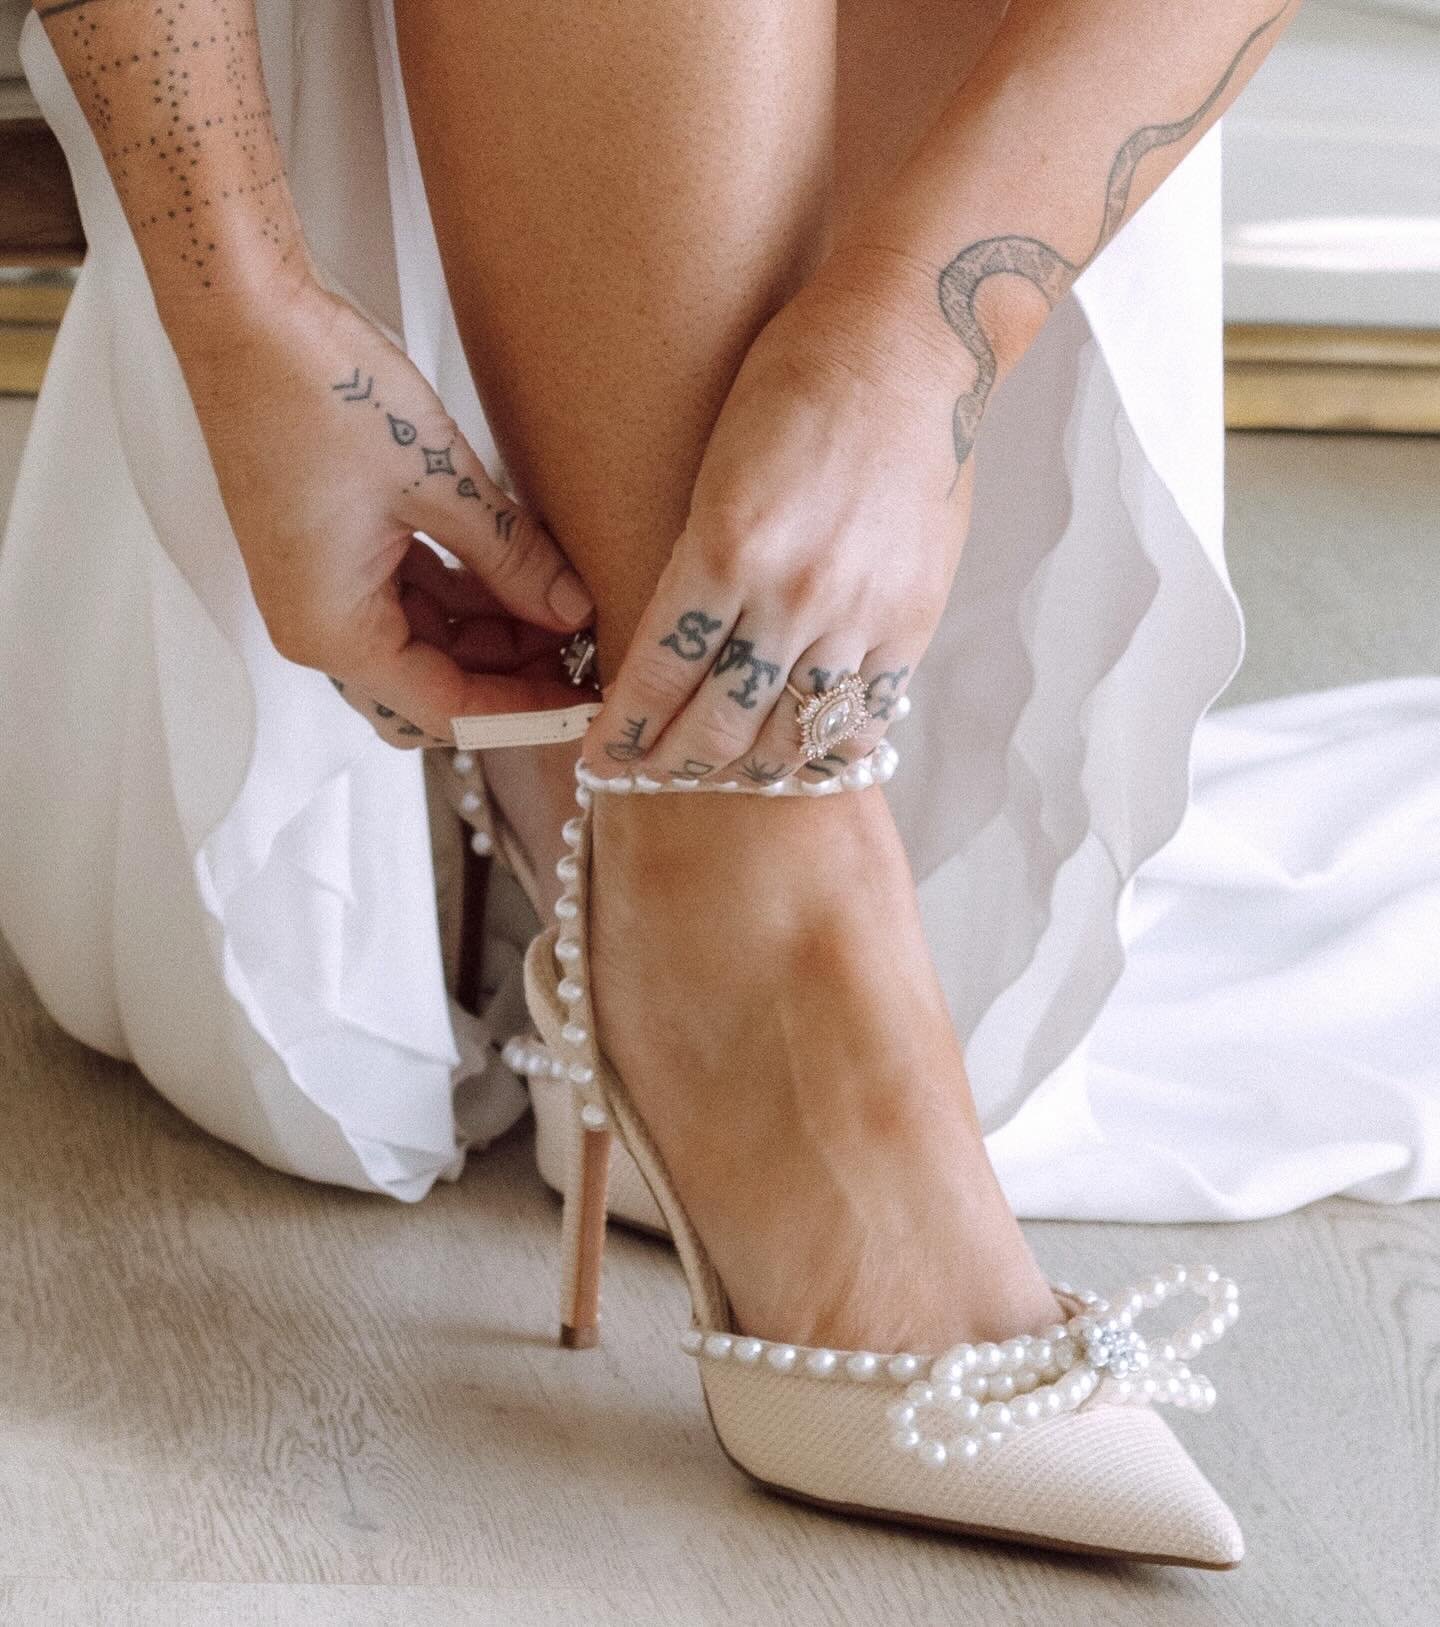 Obsessing over the details ✨ Loving how @bonschro&rsquo;s tattoos add the perfect touch to this close-up shot. 💫 #weddingphotography #stlwedding #stlweddingphotographer #tattooart #detailshots #weddinginspo